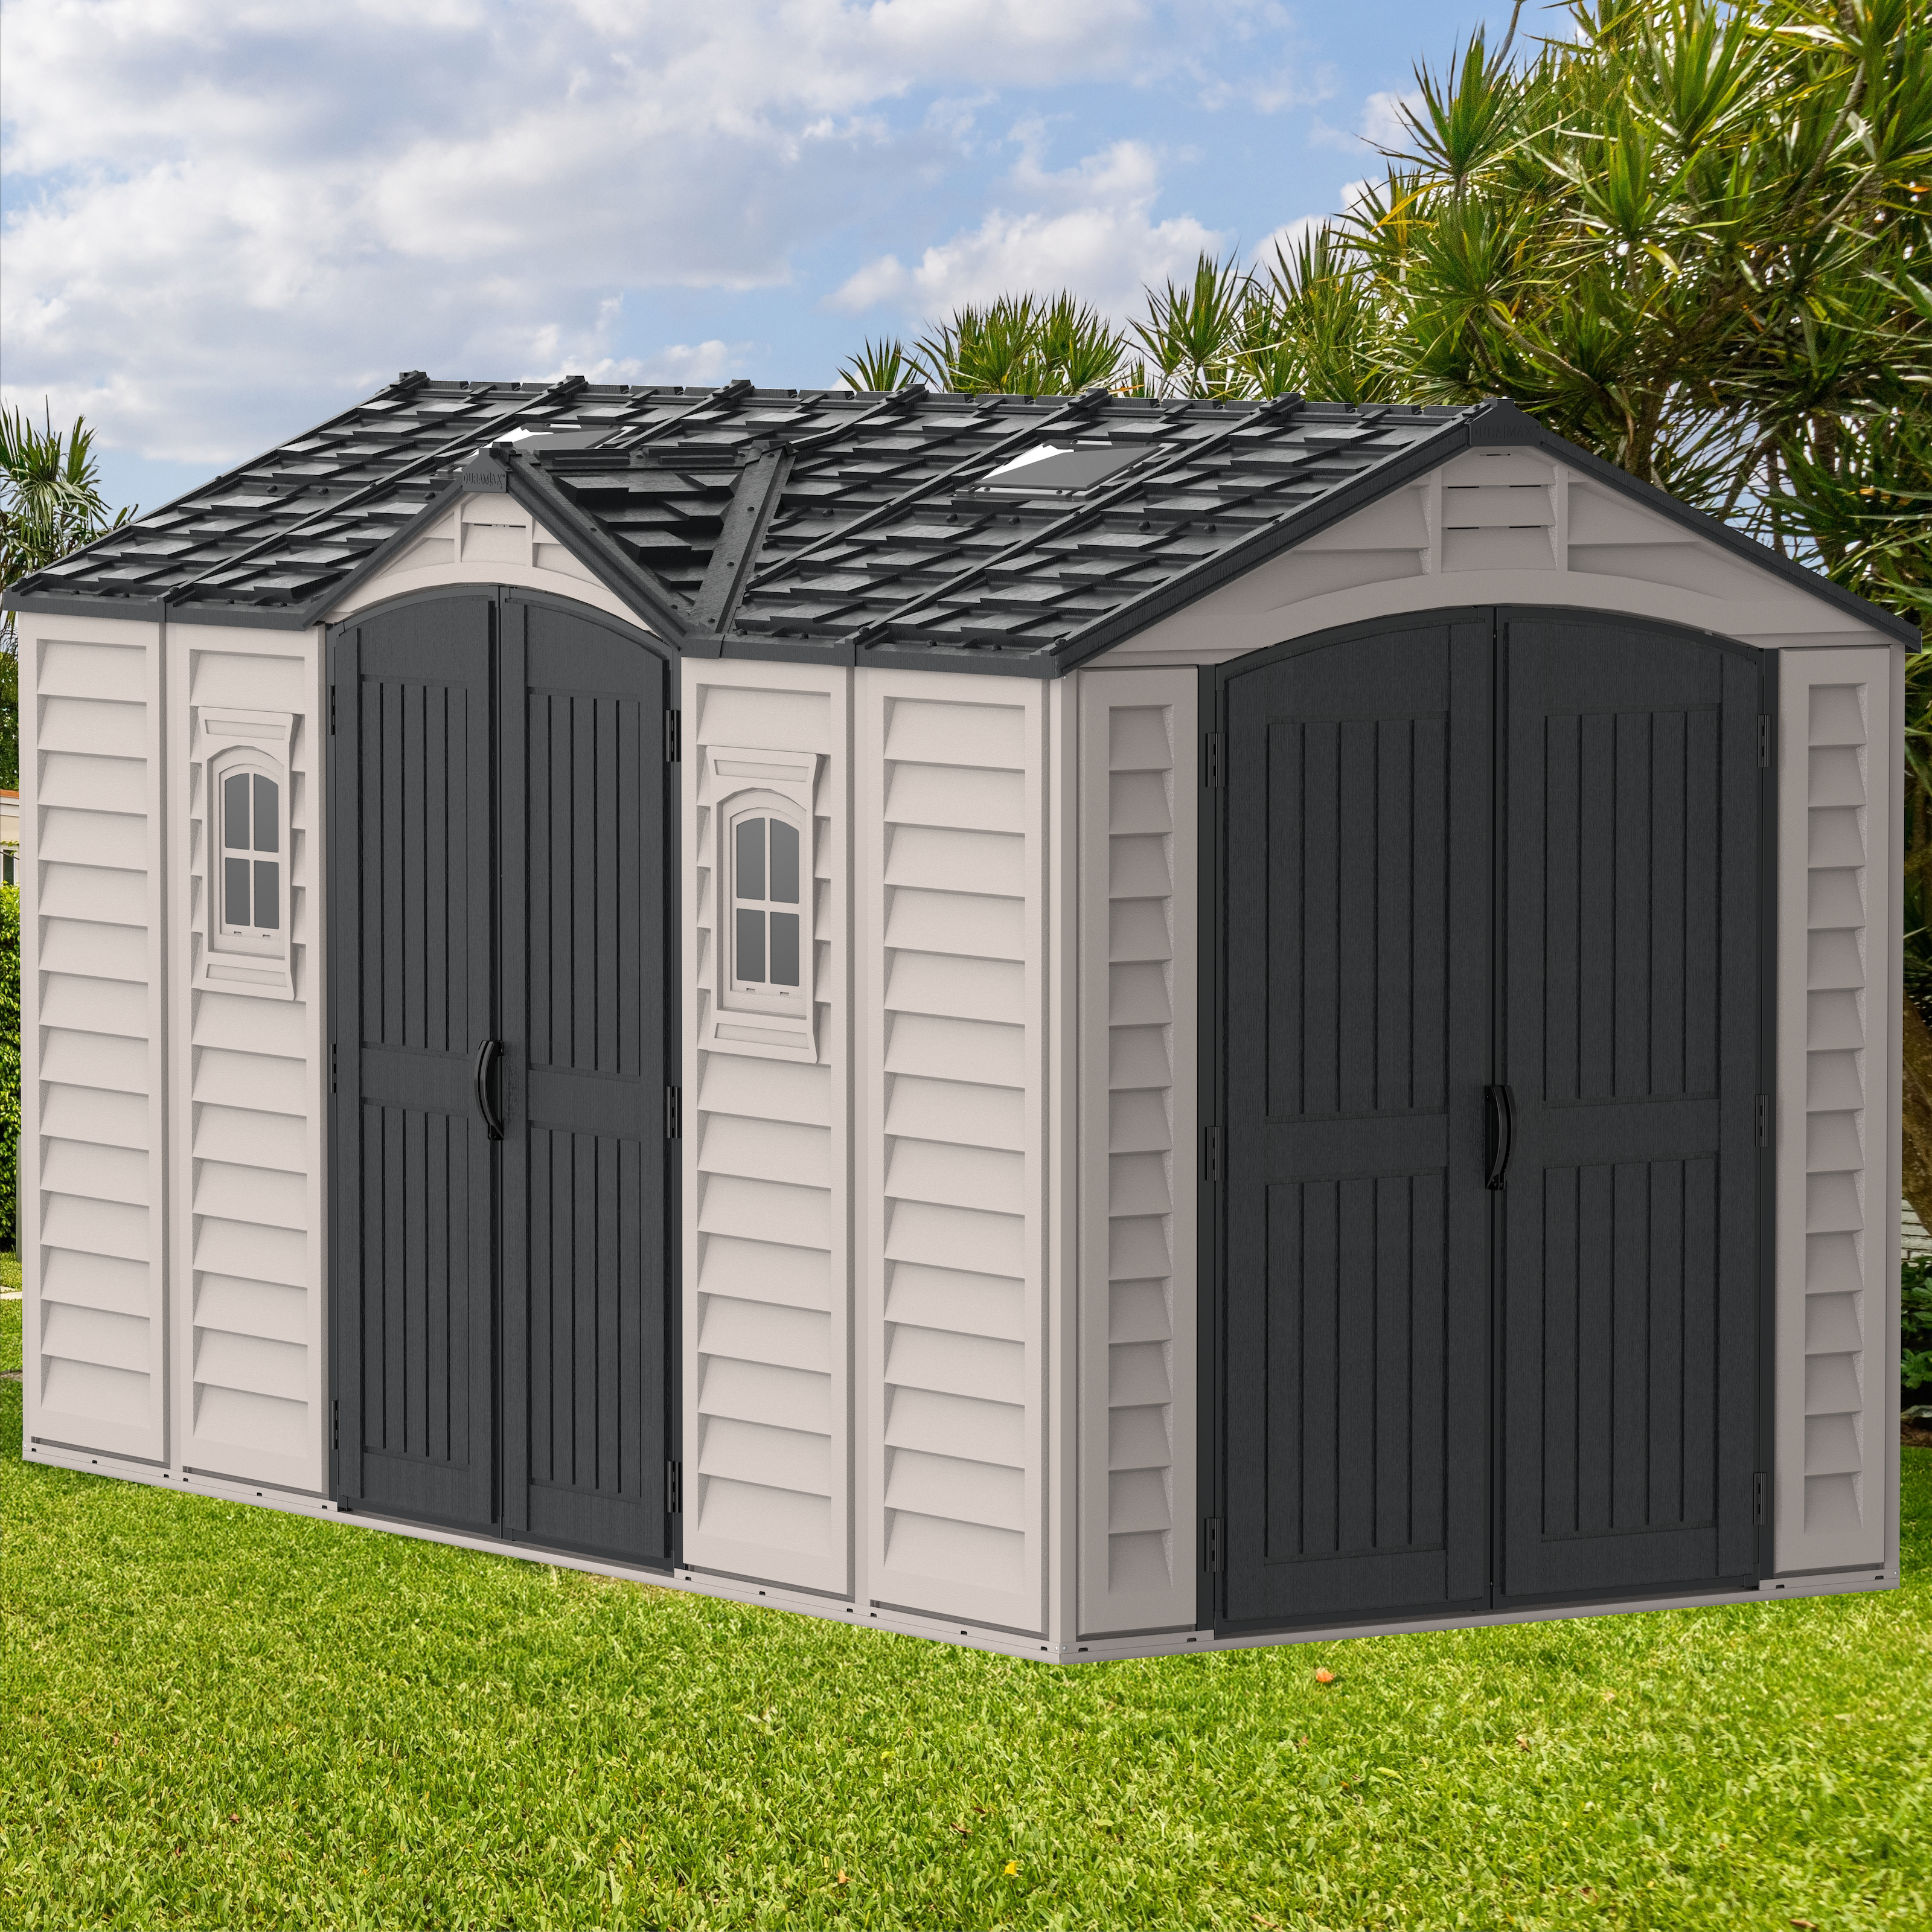 Duramax 15 x 8 Apex Pro Vinyl Shed with Foundation, 2 Windows and 2 Do